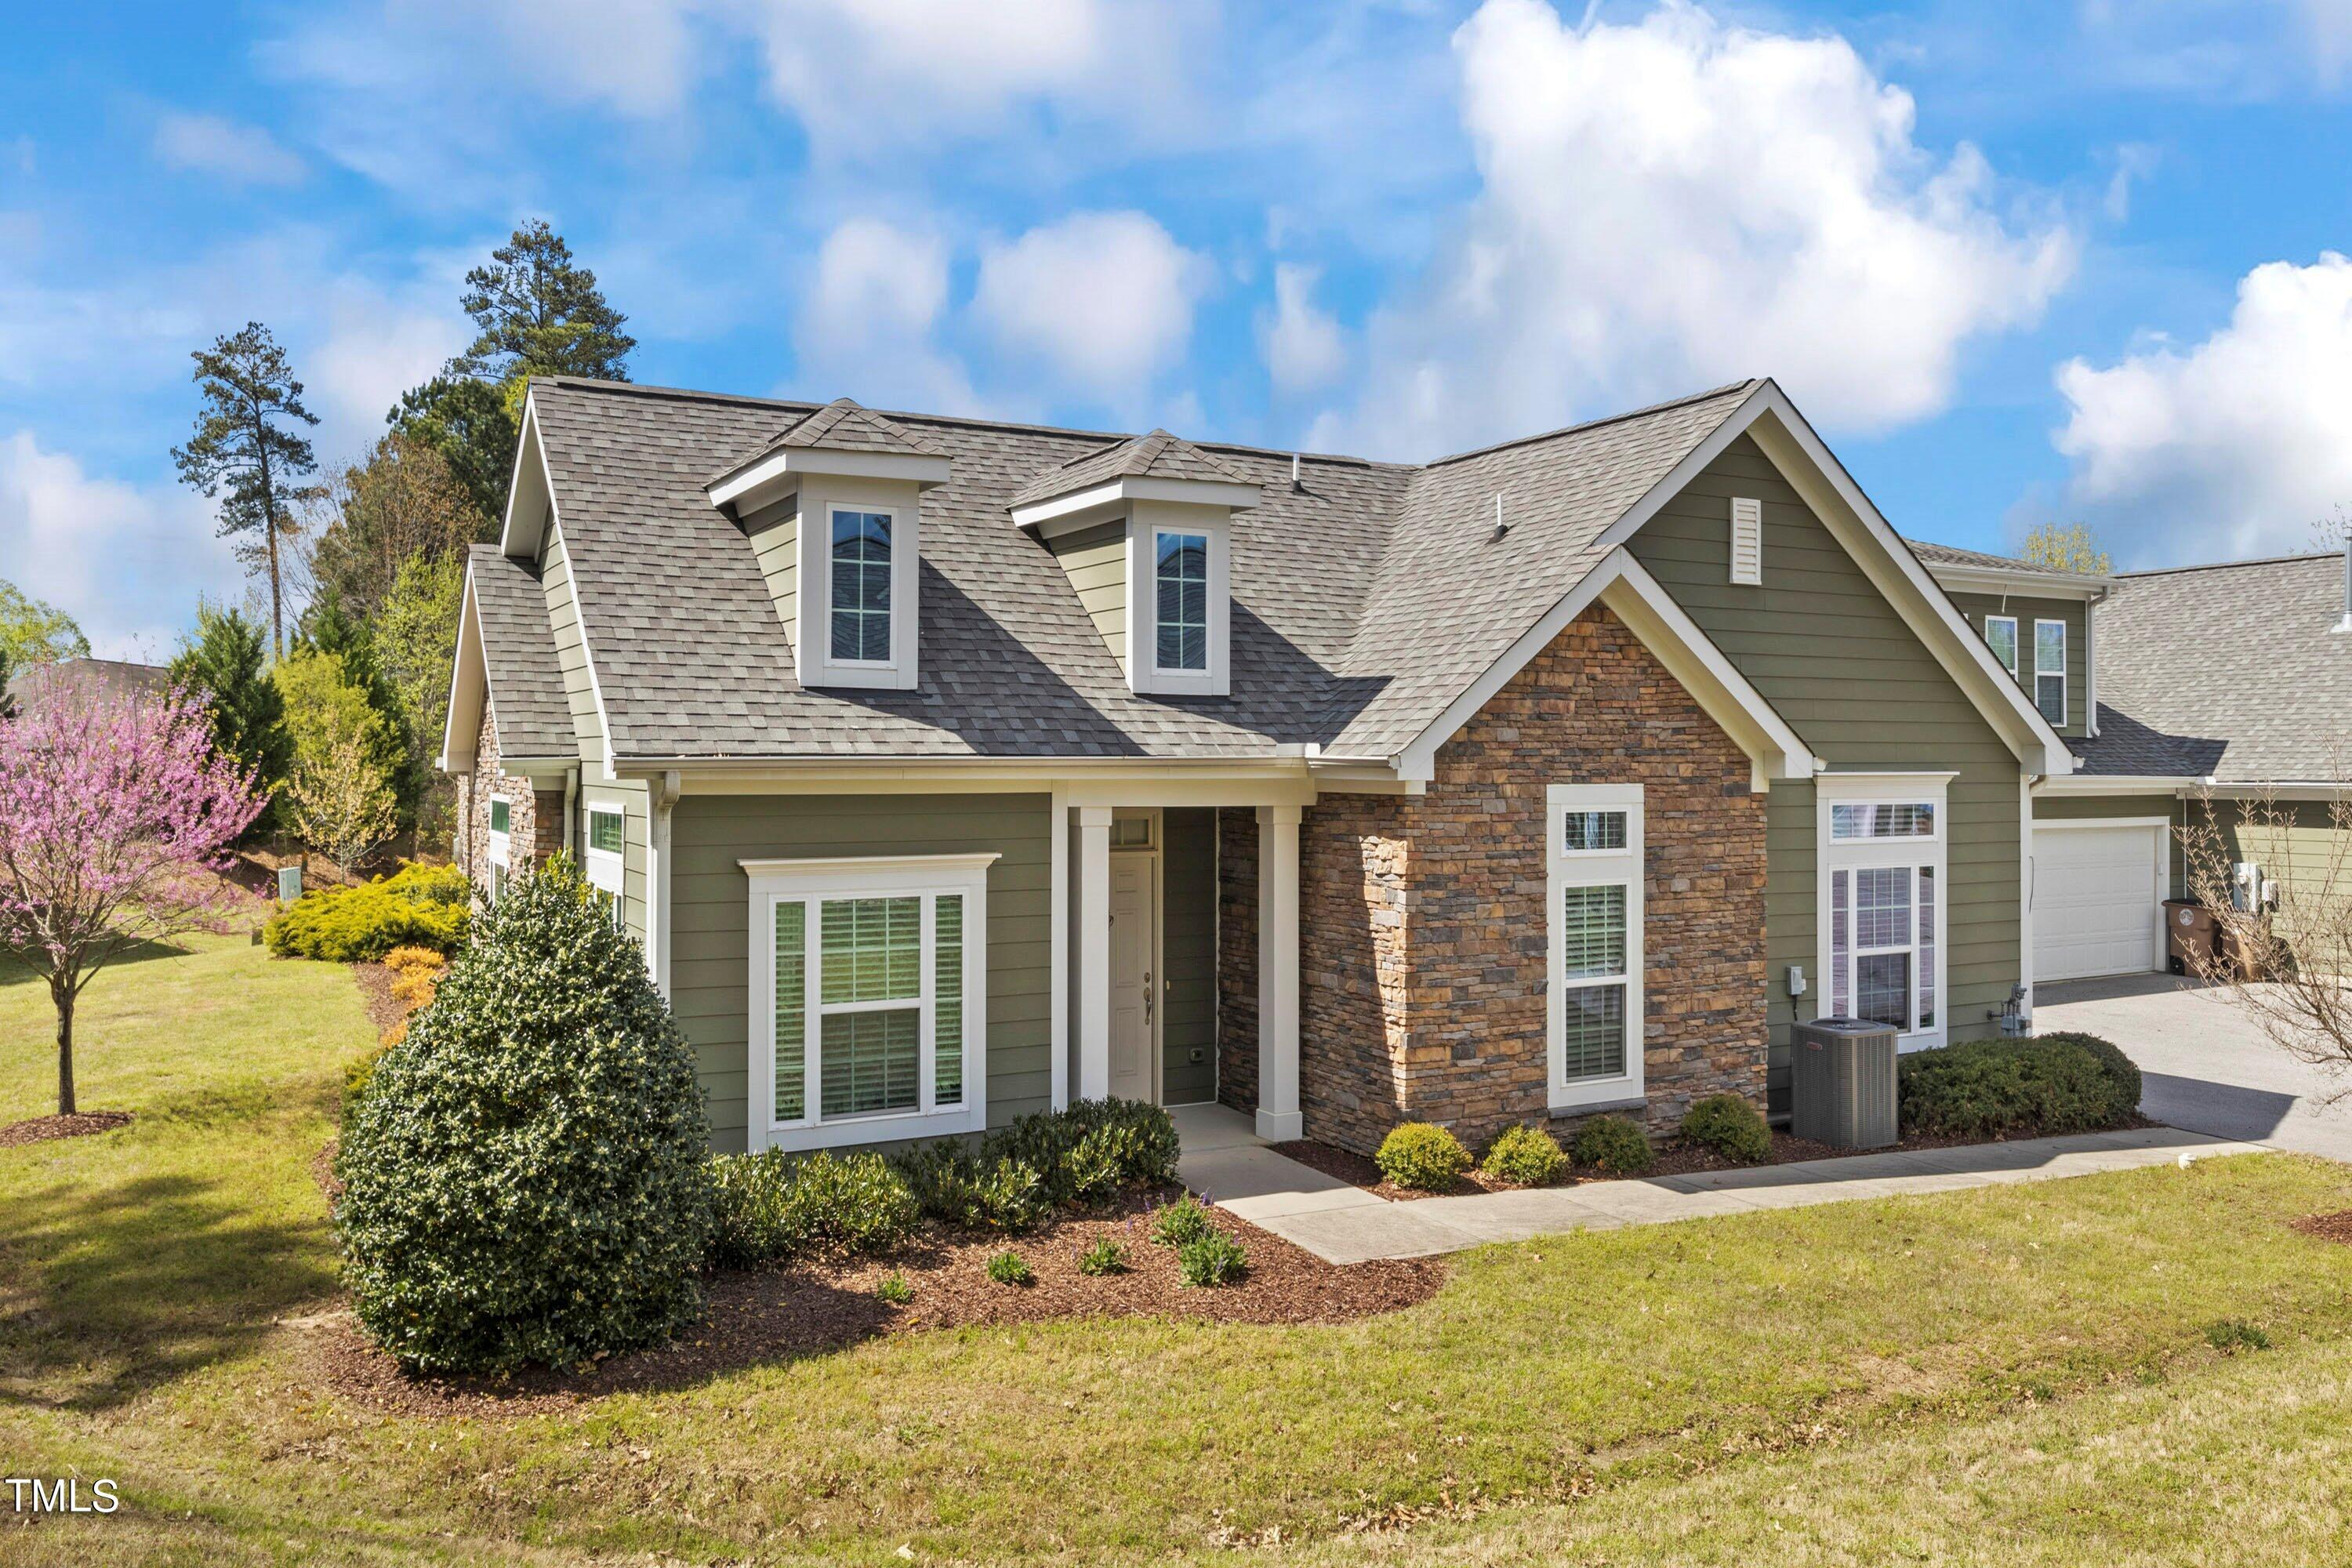 Photo one of 936 Blue Bird Ln Wake Forest NC 27587 | MLS 10021874